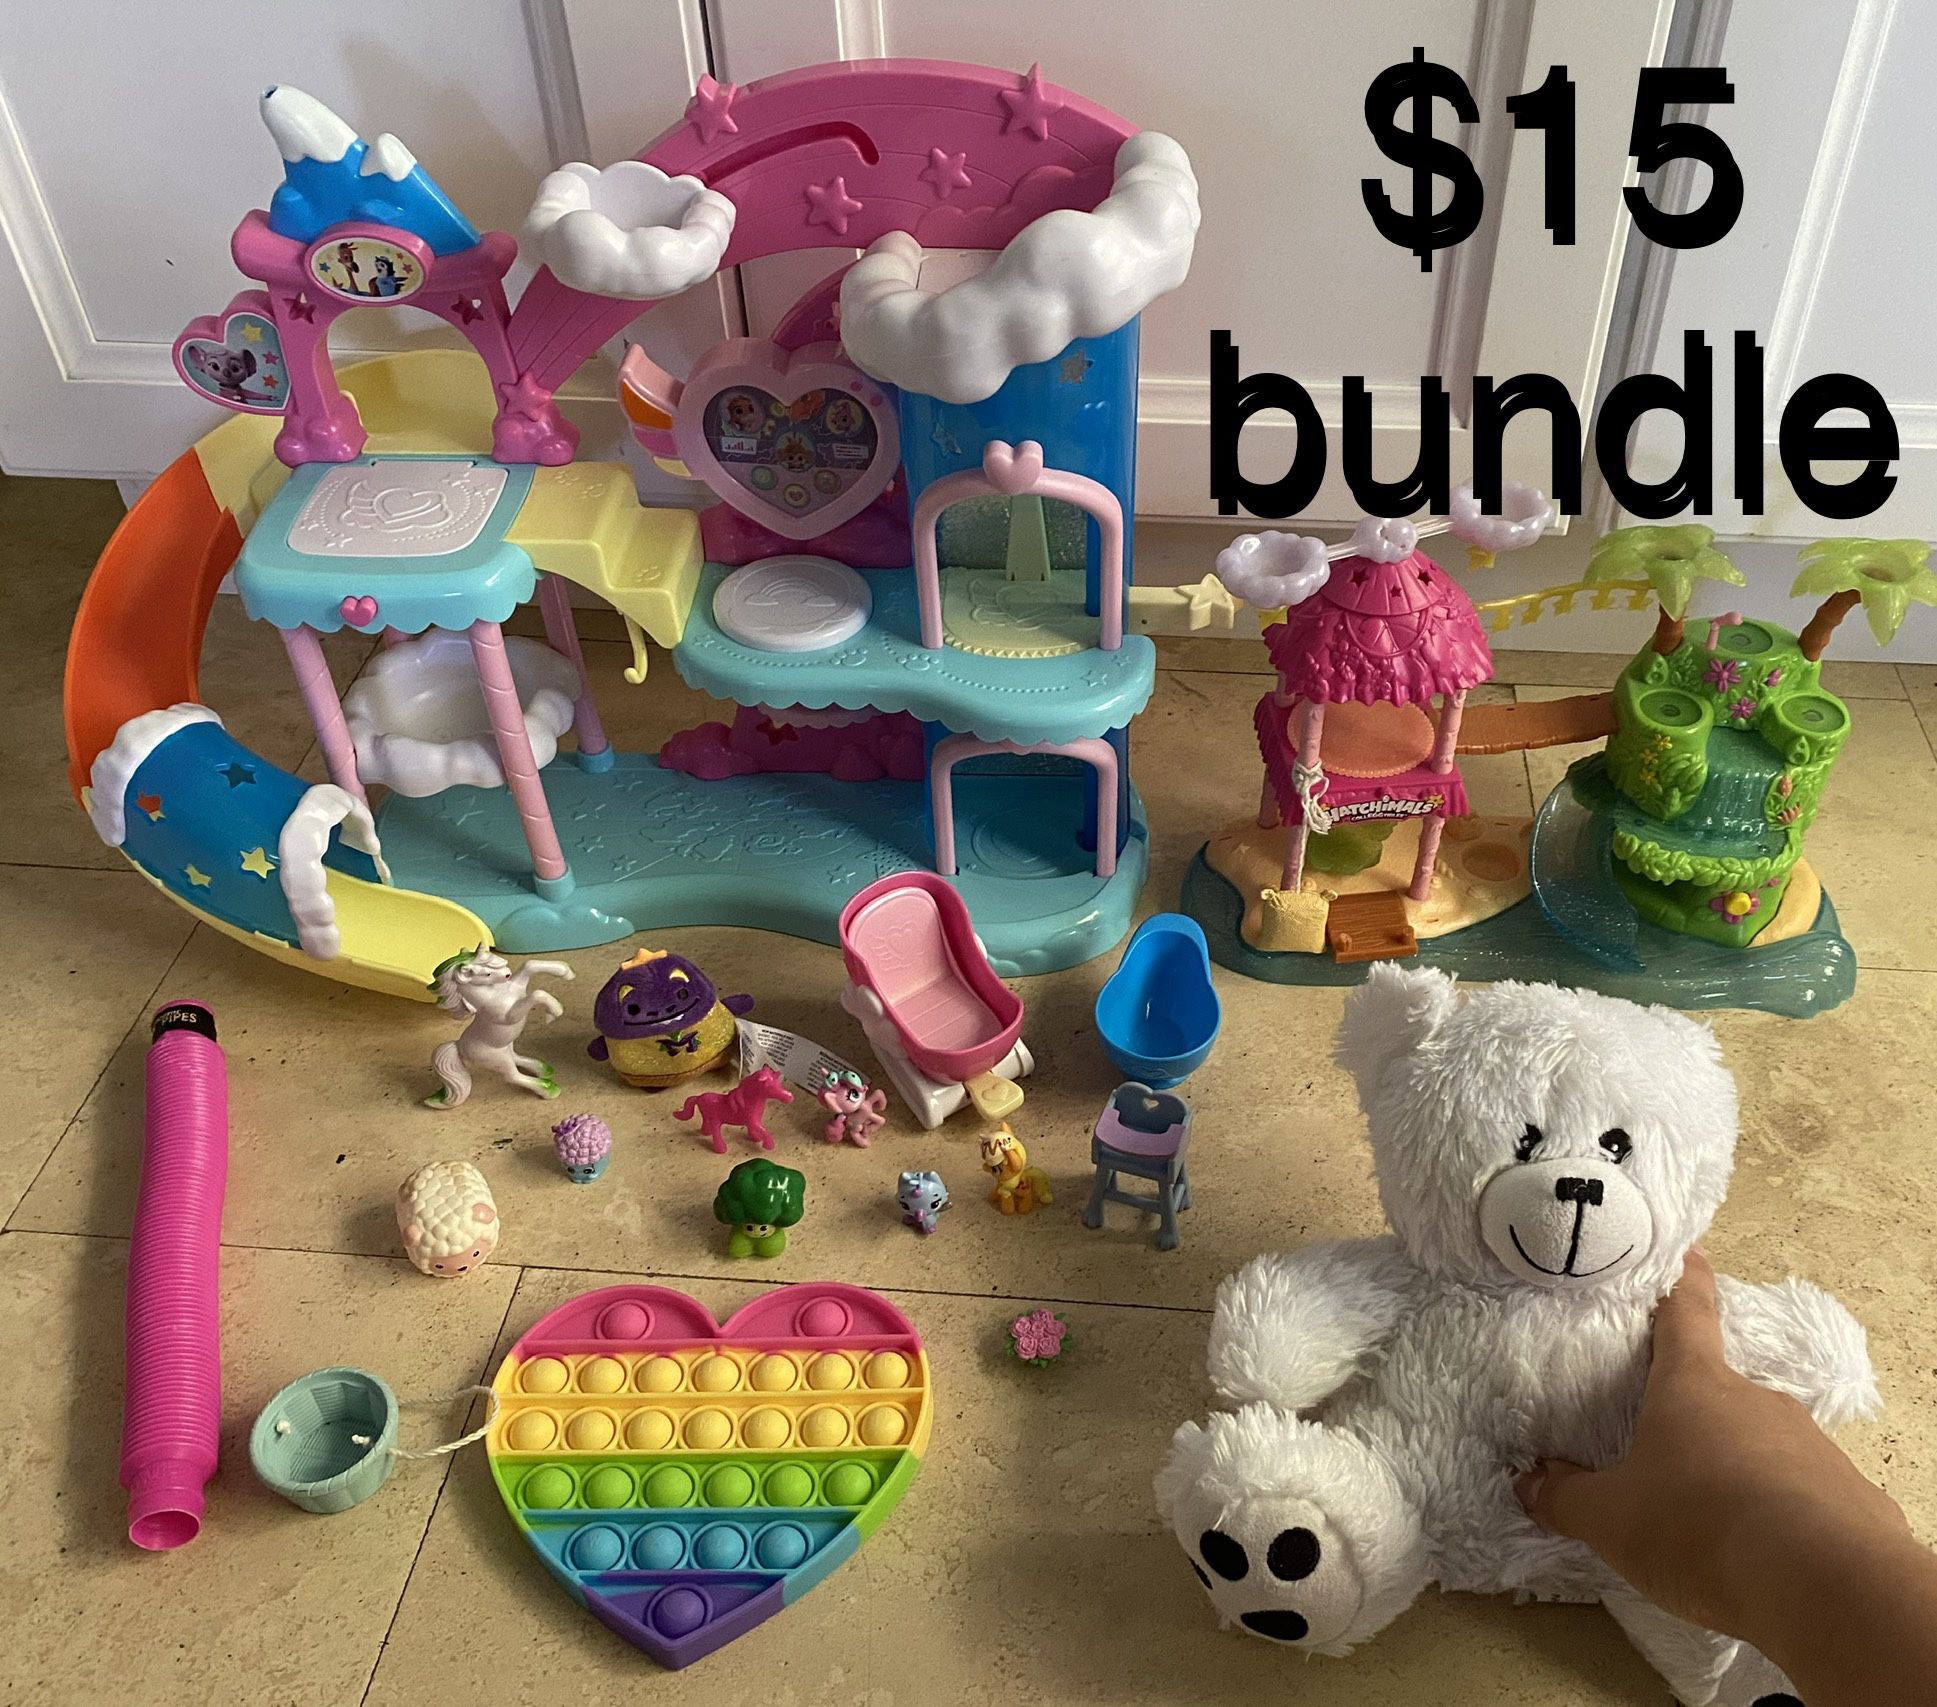 $15 Disney T.o.t.s. Nursery Headquarters Playset and Hatchimals Toy Jungle All for $15